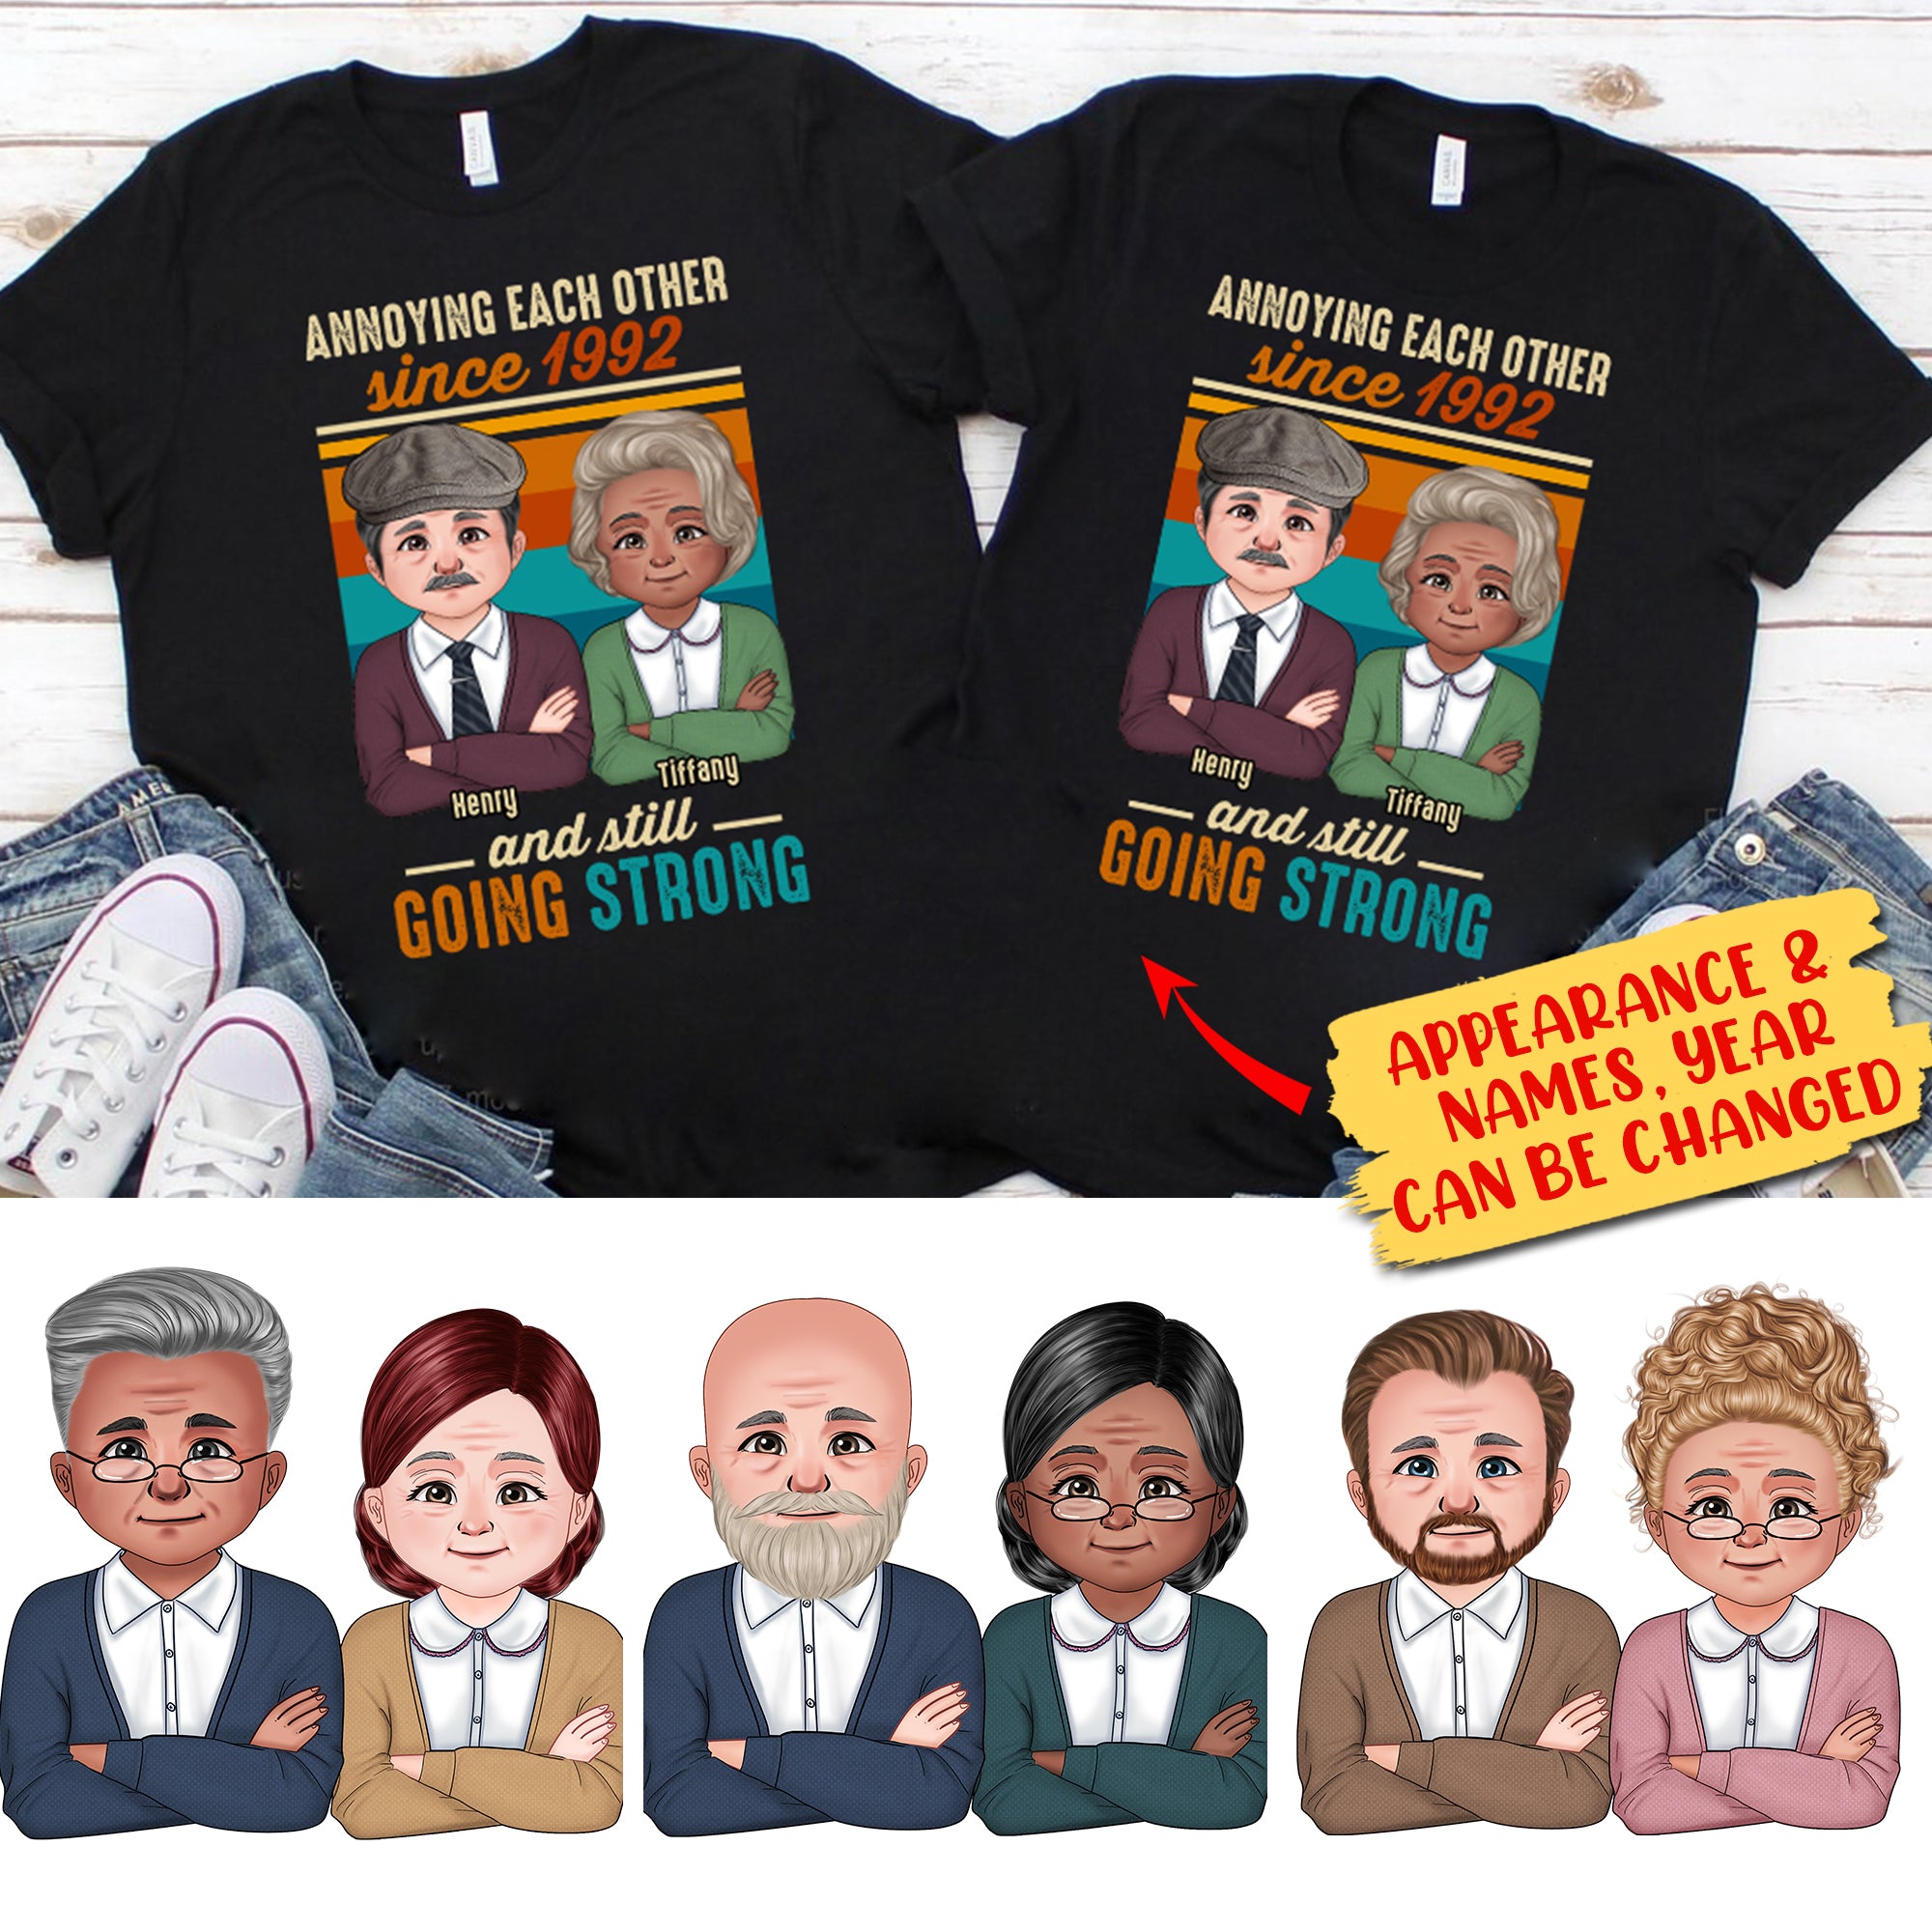 Annoying Each Other And Still Going Strong - Custom Appearance And Name - Personalized T-Shirt - Gift For Family, Husband & Wife, Grandpa & Grandma